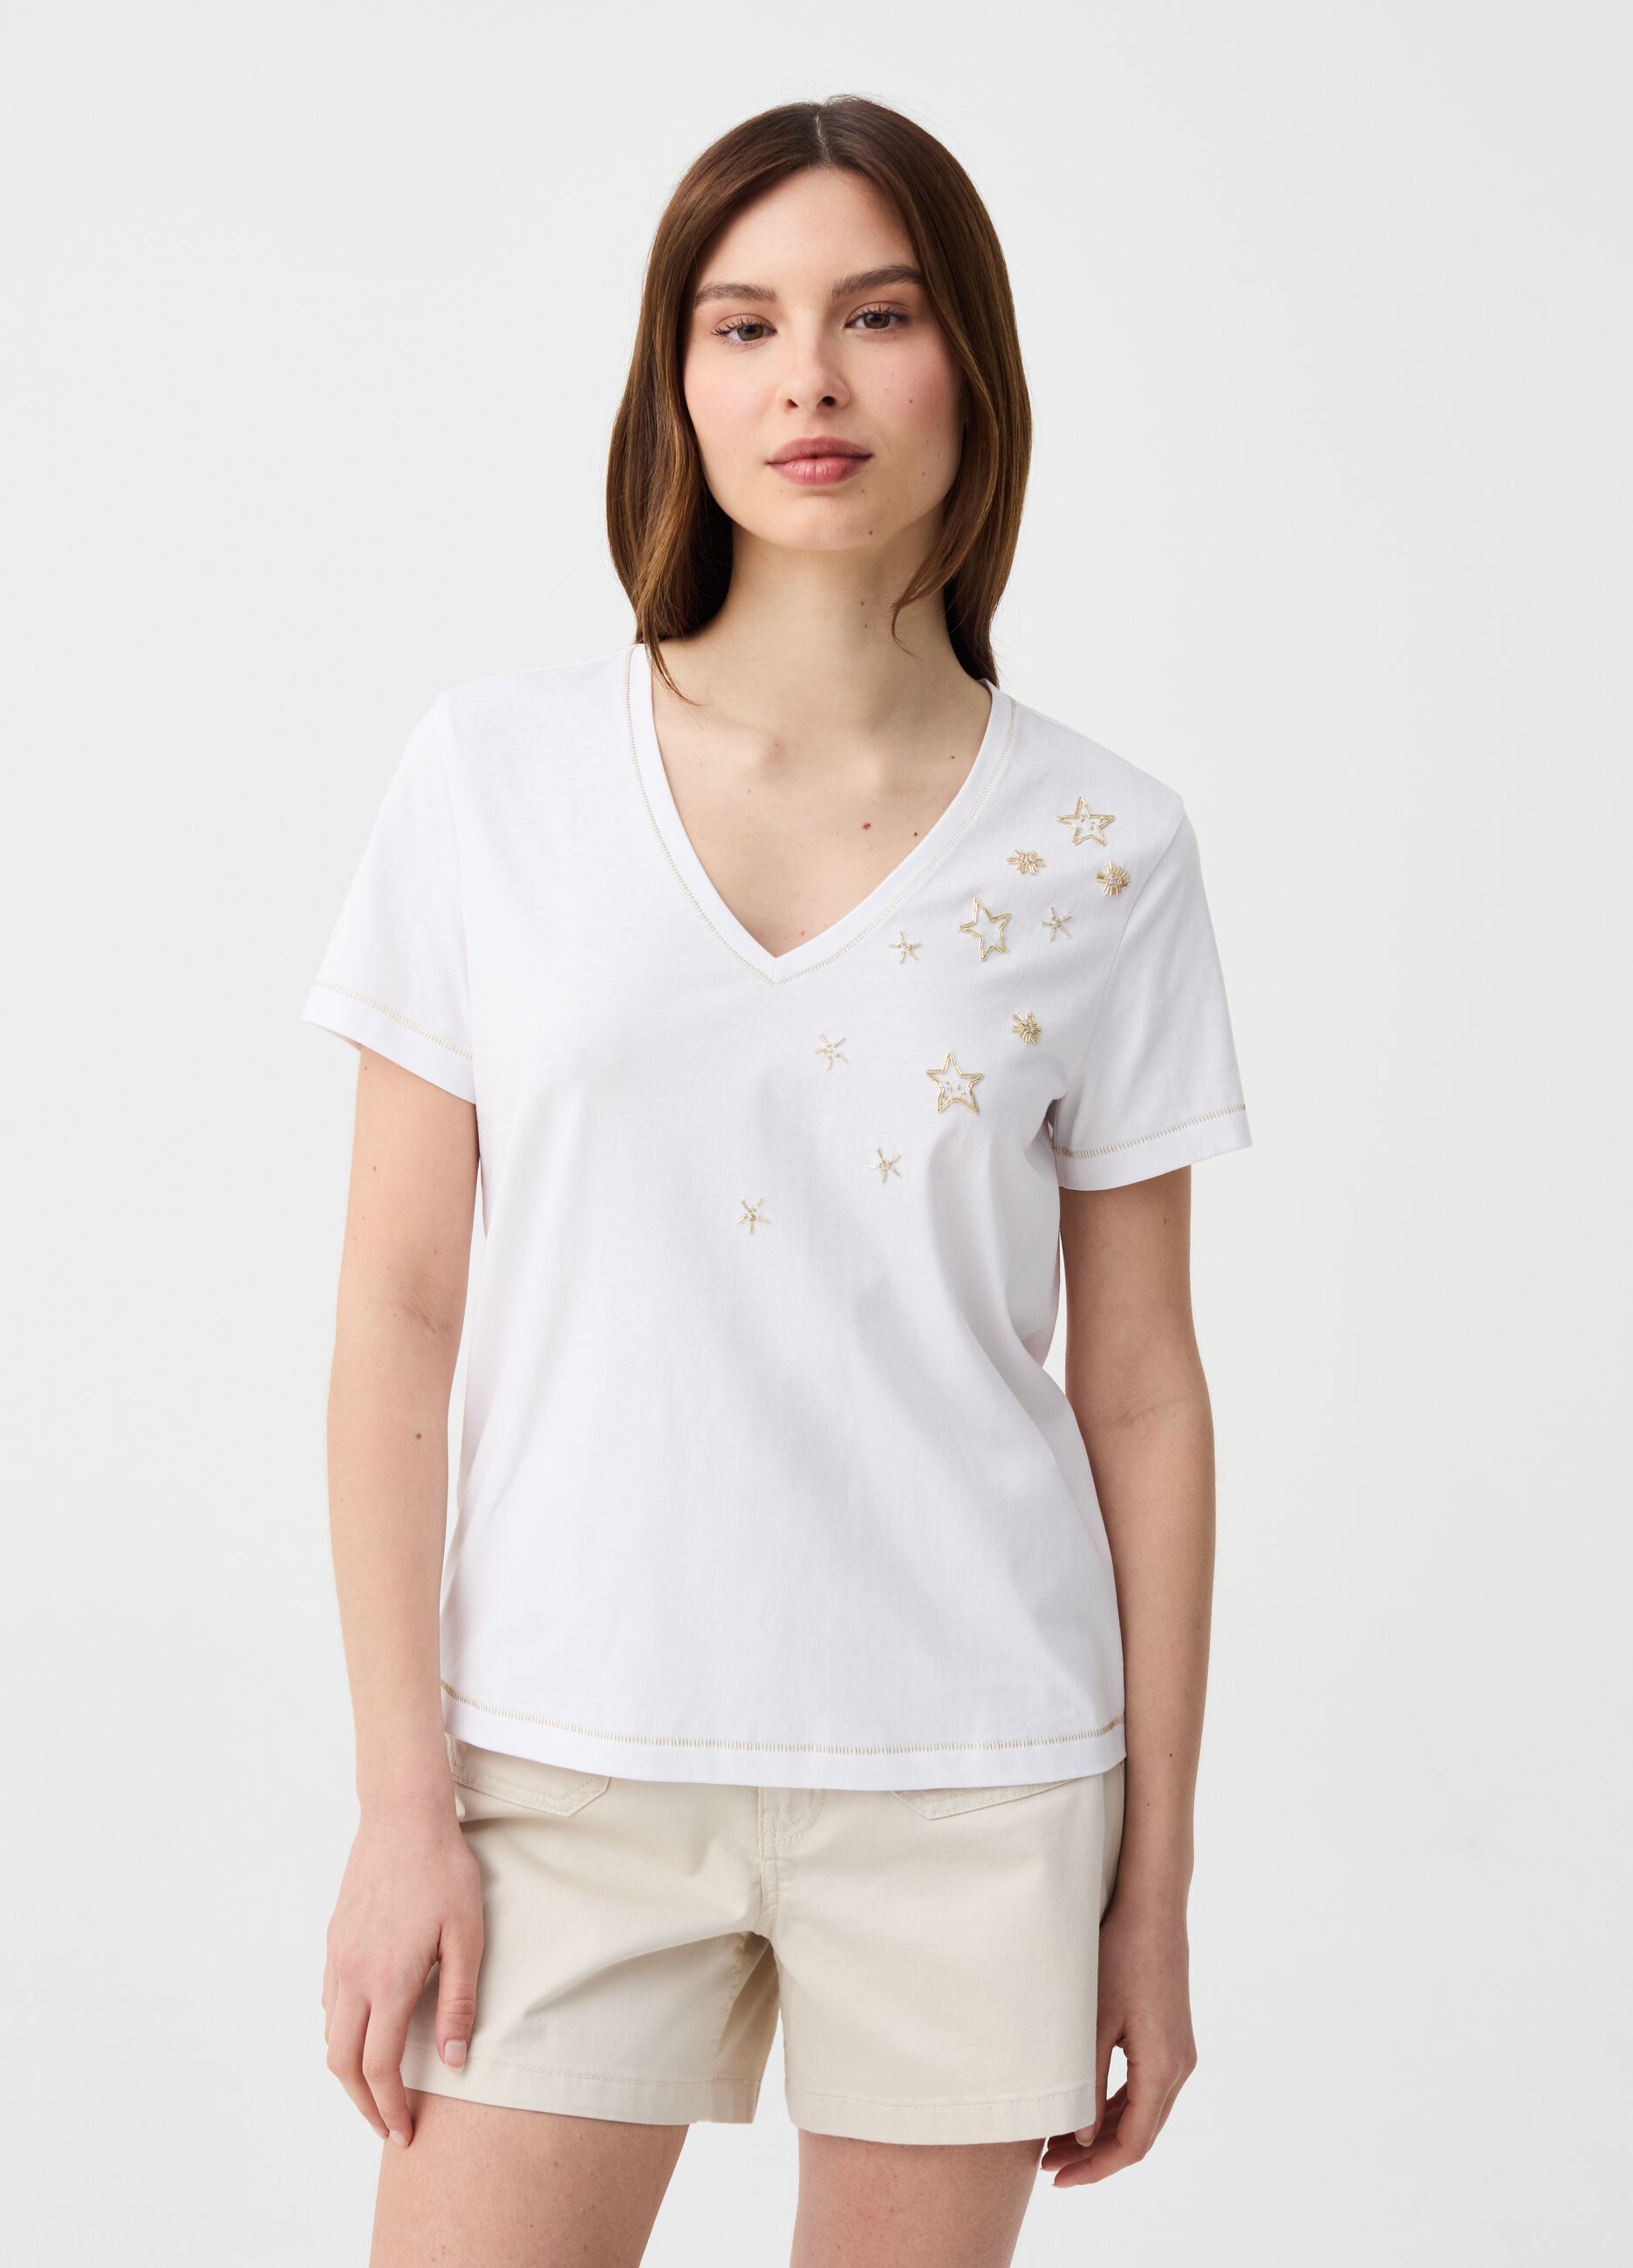 T-shirt with stars application